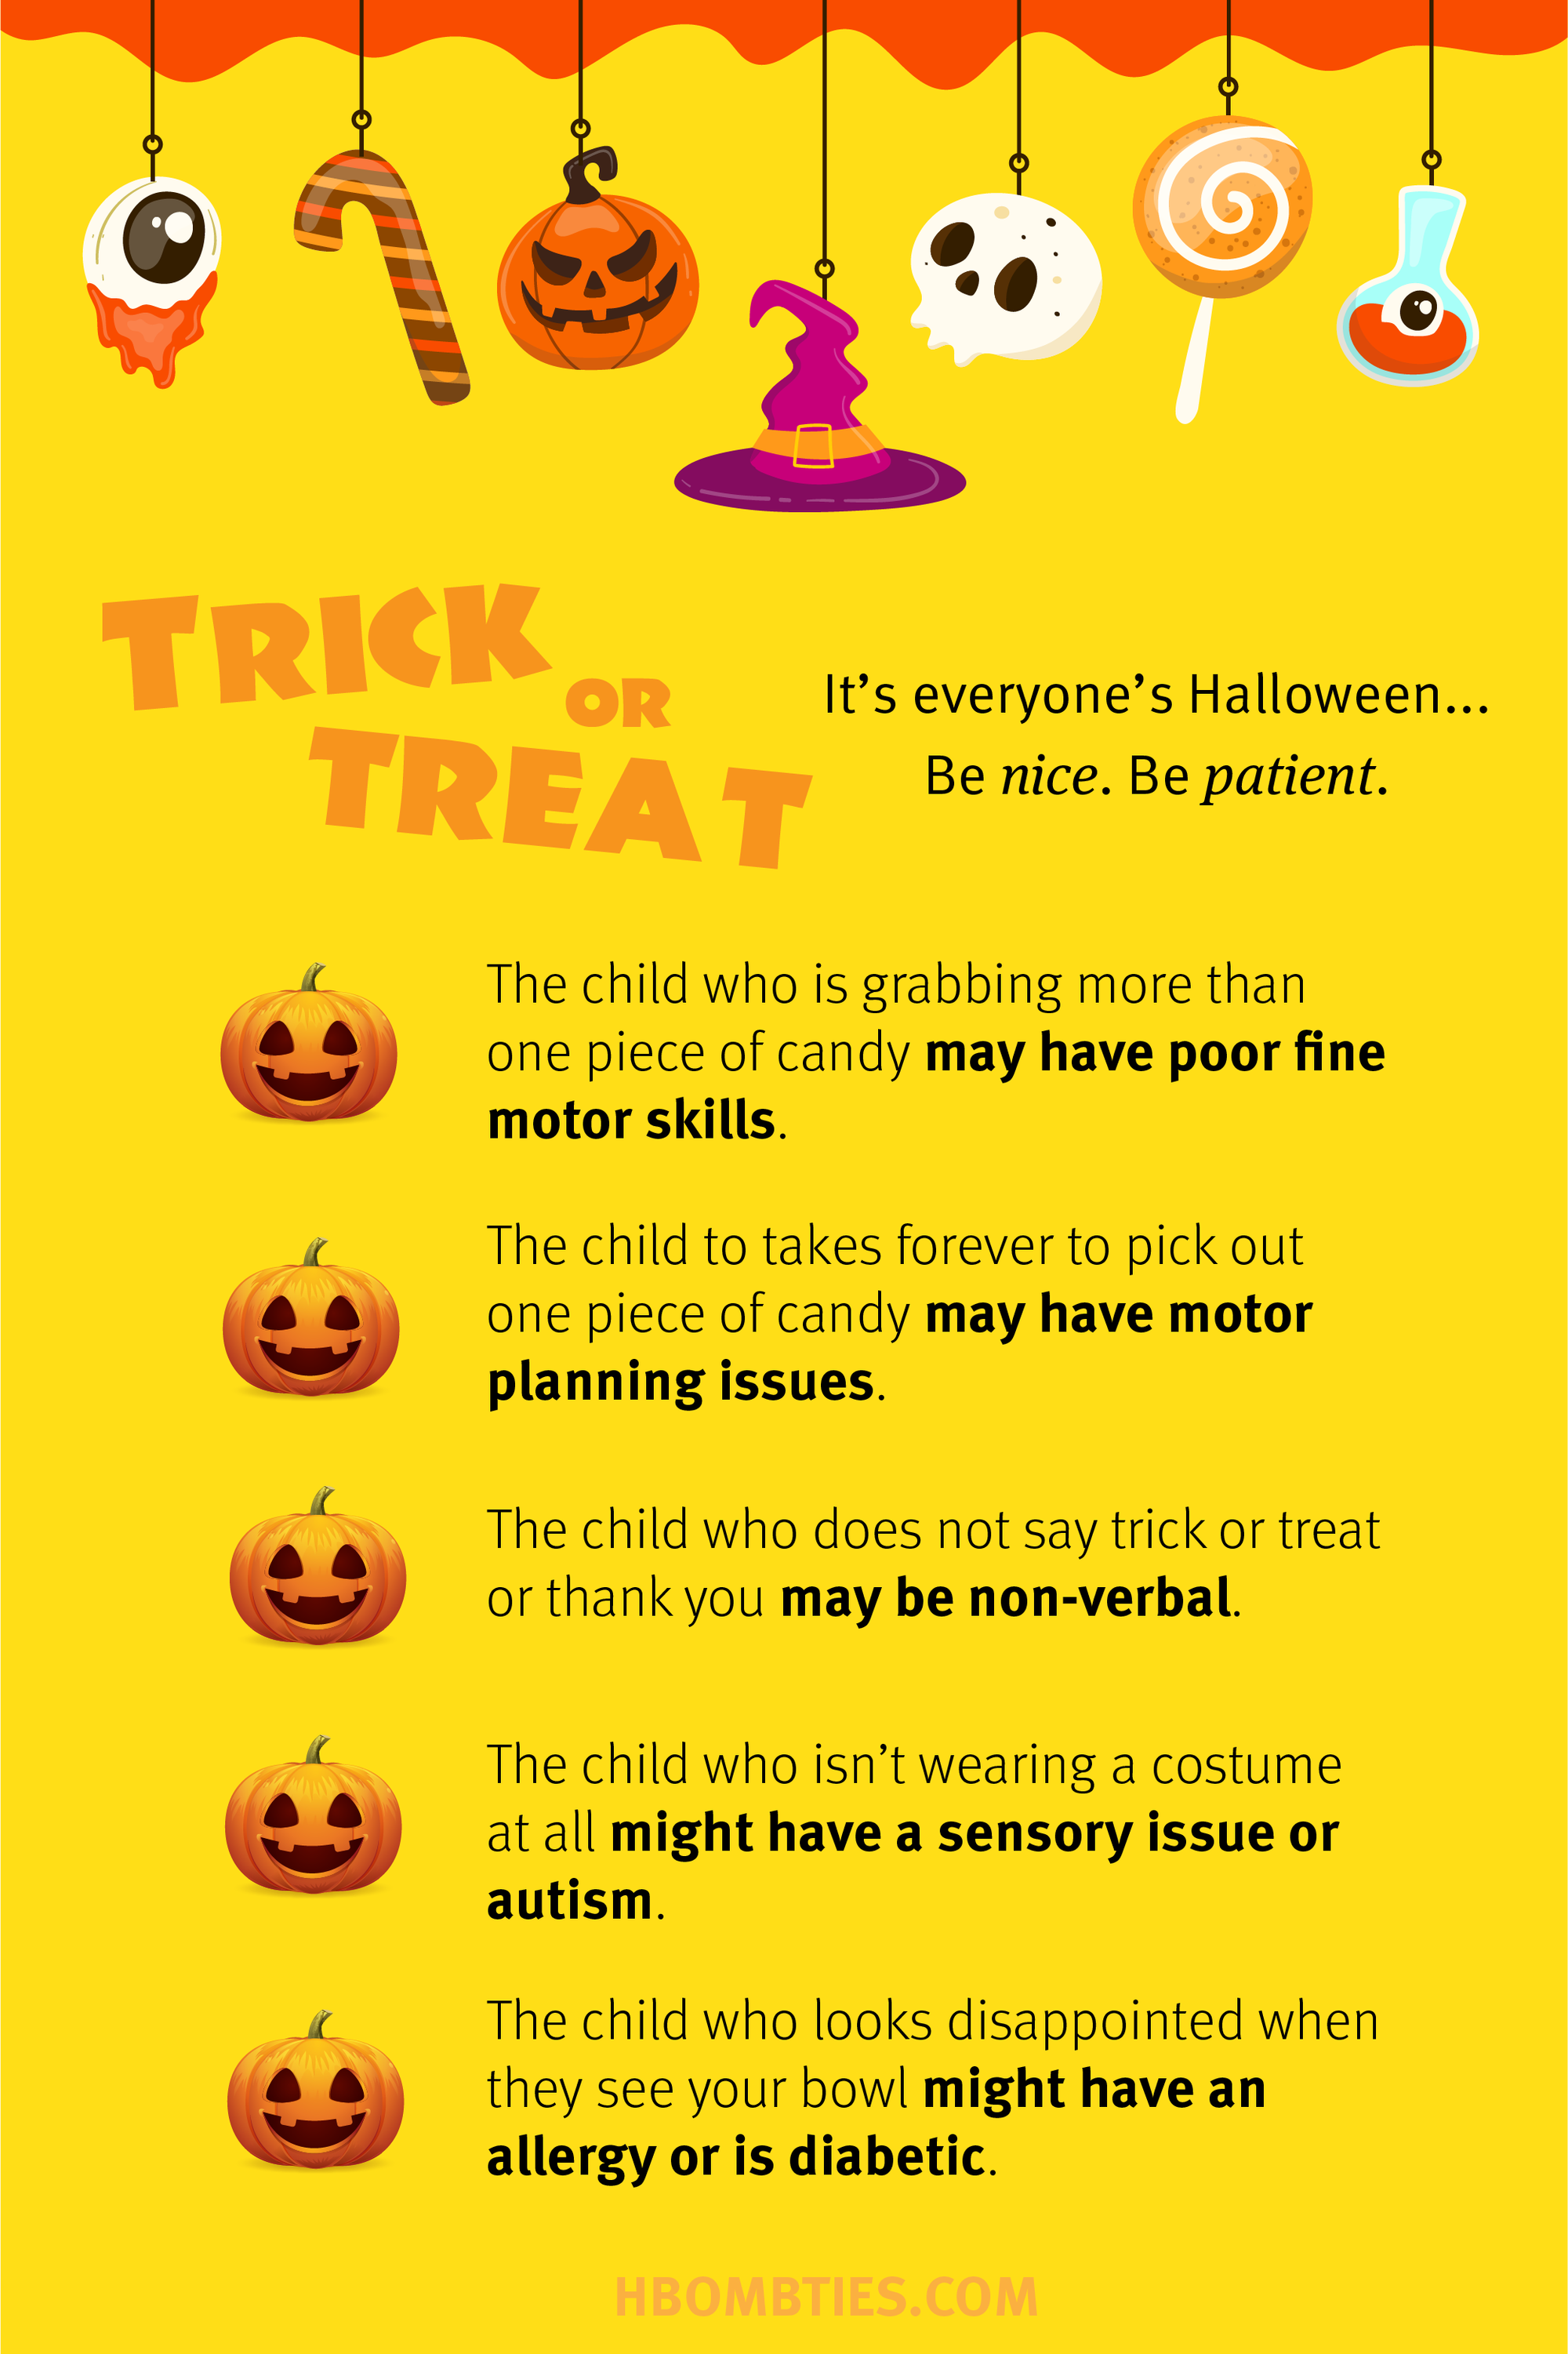 Trick or Treating Tips for an Accessible Halloween